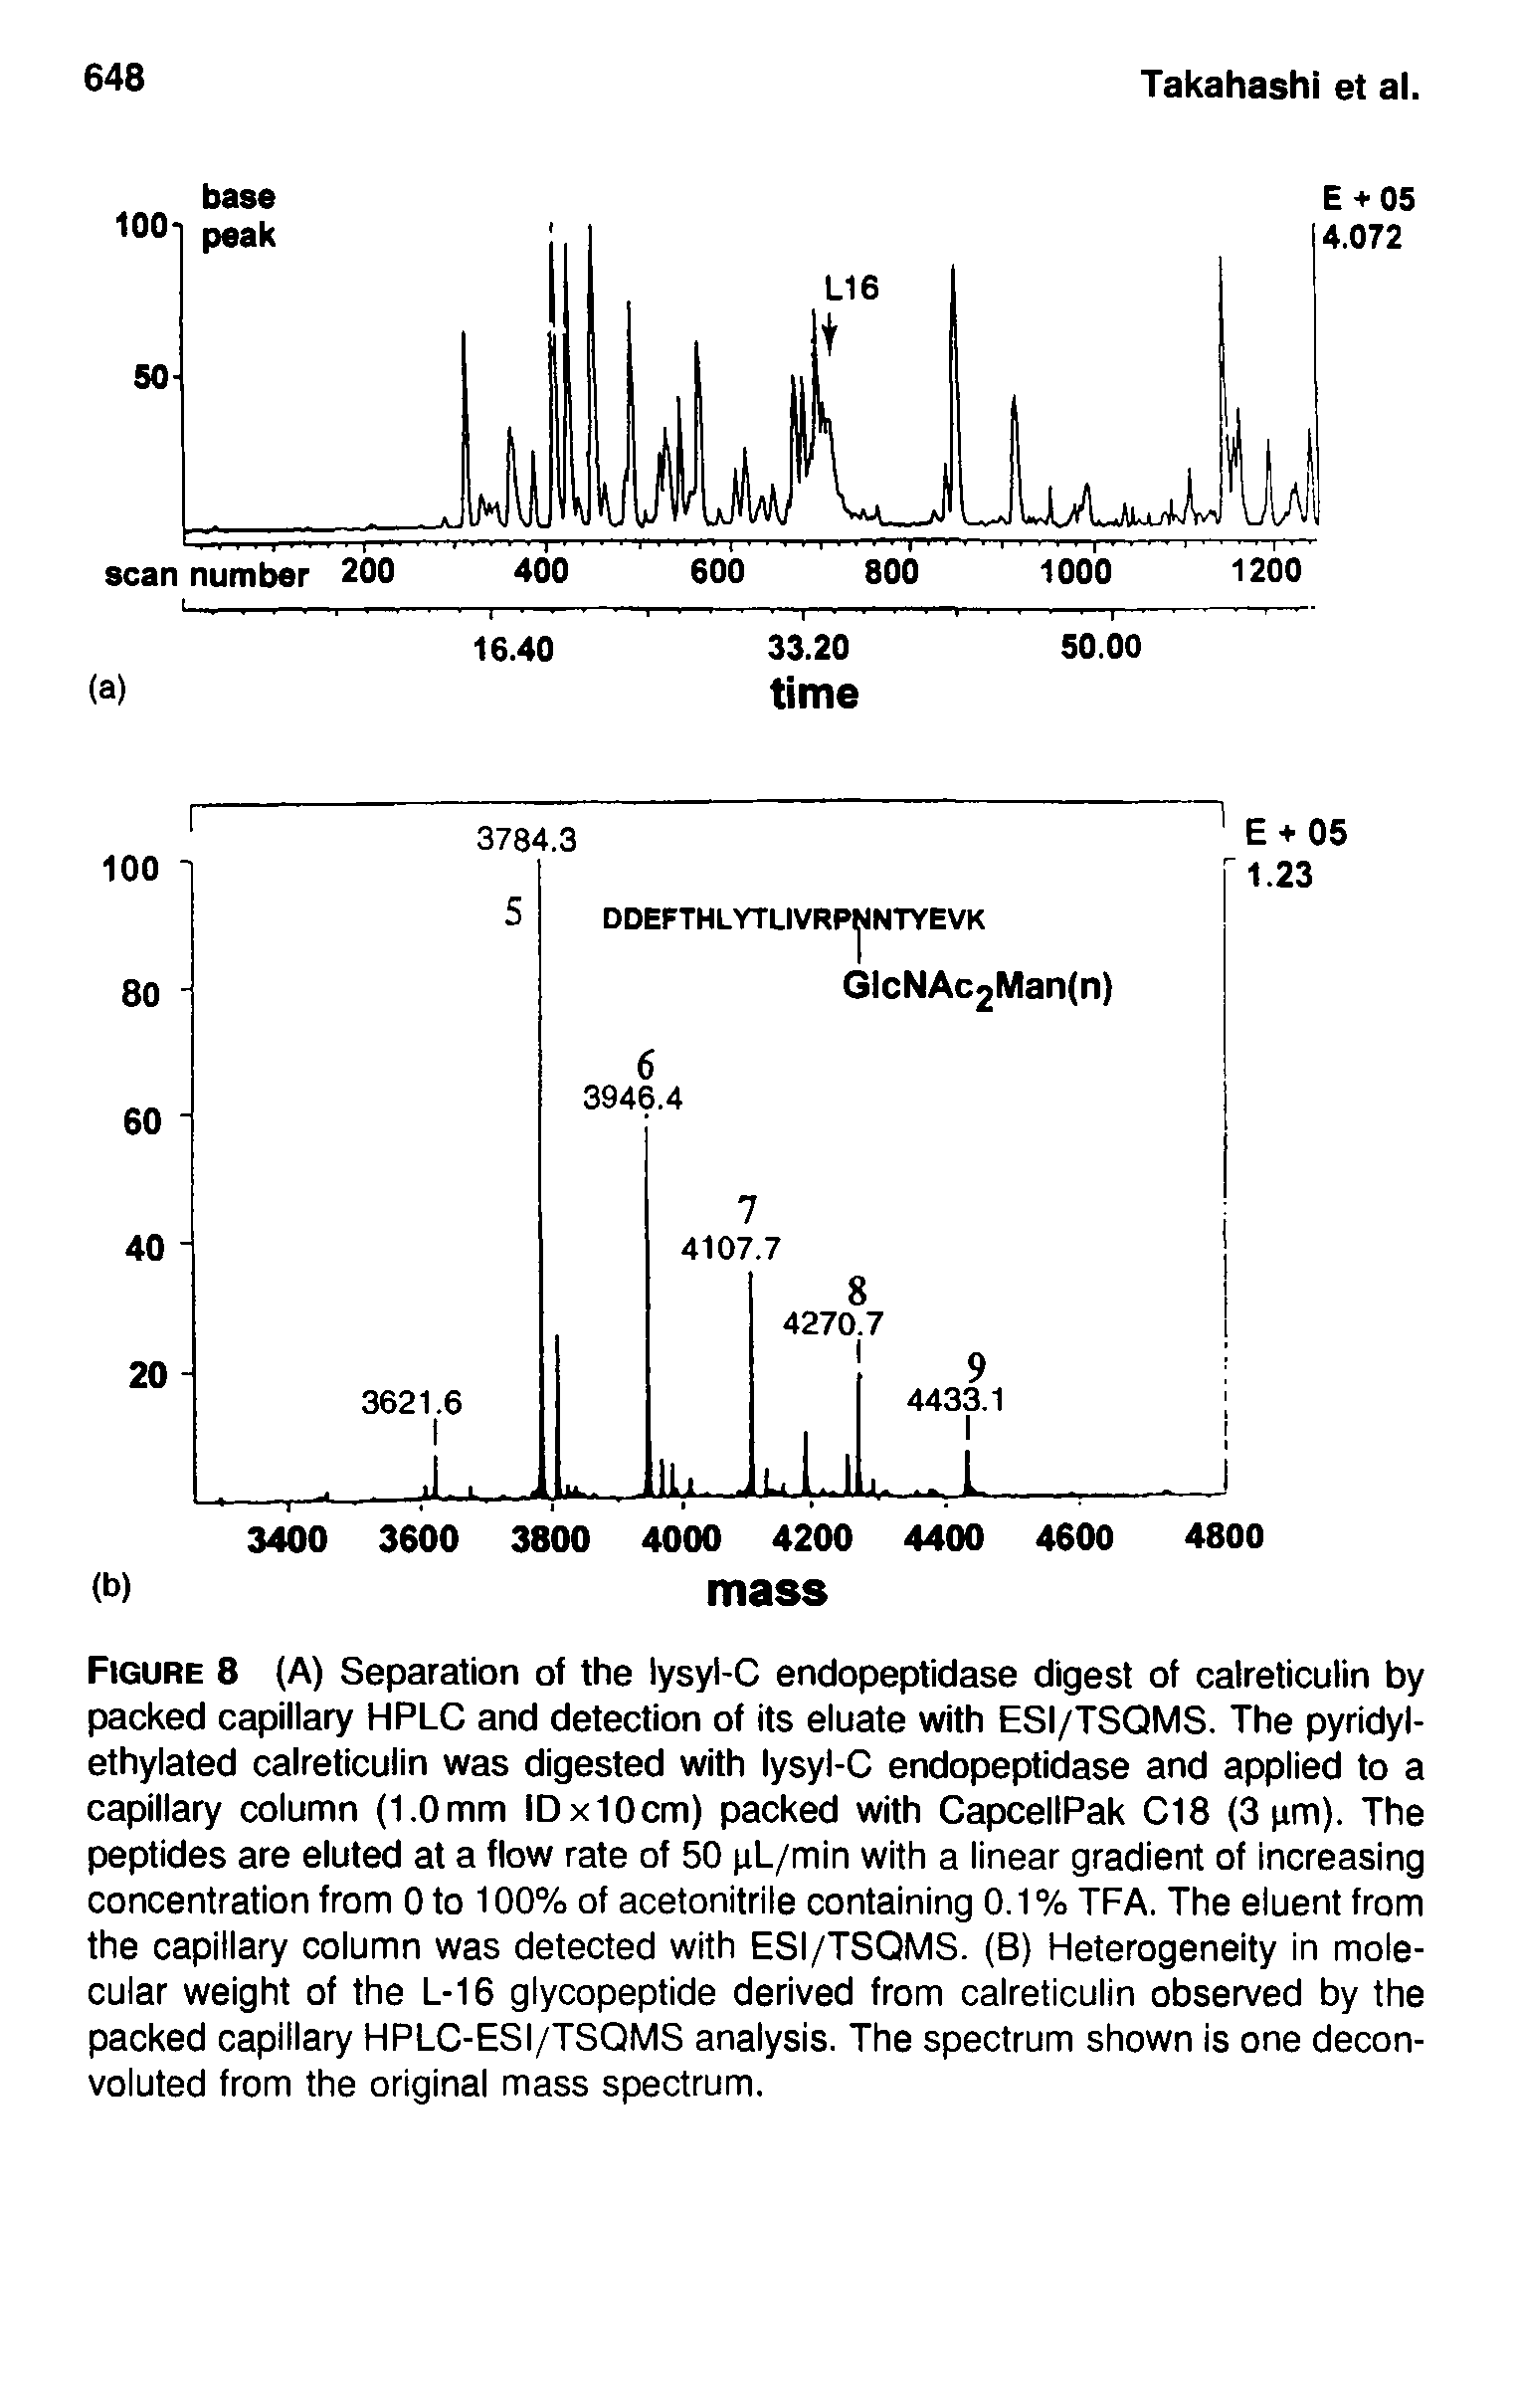 Figure 8 (A) Separation of the lysyl-C endopeptidase digest of calreticulin by packed capillary HPLC and detection of its eluate with ESI/TSQMS. The pyridyl-ethylated calreticulin was digested with lysyl-C endopeptidase and applied to a capillary column (1.0mm IDxIOcm) packed with CapcellPak C18 (3 urn). The peptides are eluted at a flow rate of 50 nL/min with a linear gradient of increasing concentration from 0 to 100% of acetonitrile containing 0.1 % TFA. The eluent from the capillary column was detected with ESI/TSQMS. (B) Heterogeneity in molecular weight of the L-16 glycopeptide derived from calreticulin observed by the packed capillary HPLC-ESI/TSQMS analysis. The spectrum shown is one decon-voluted from the original mass spectrum.